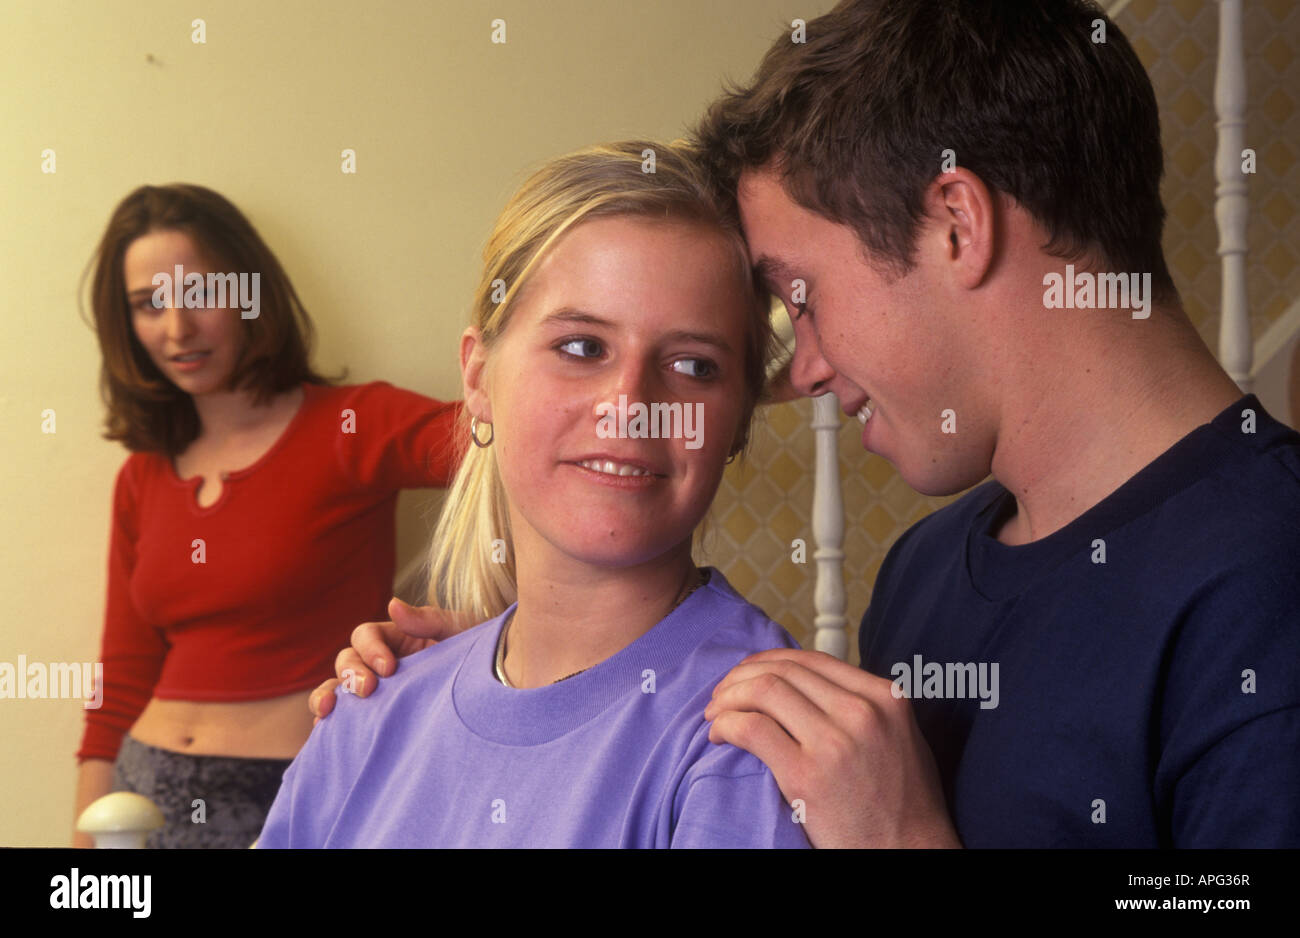 girl looking jealously at another girl with a boy Stock Photo